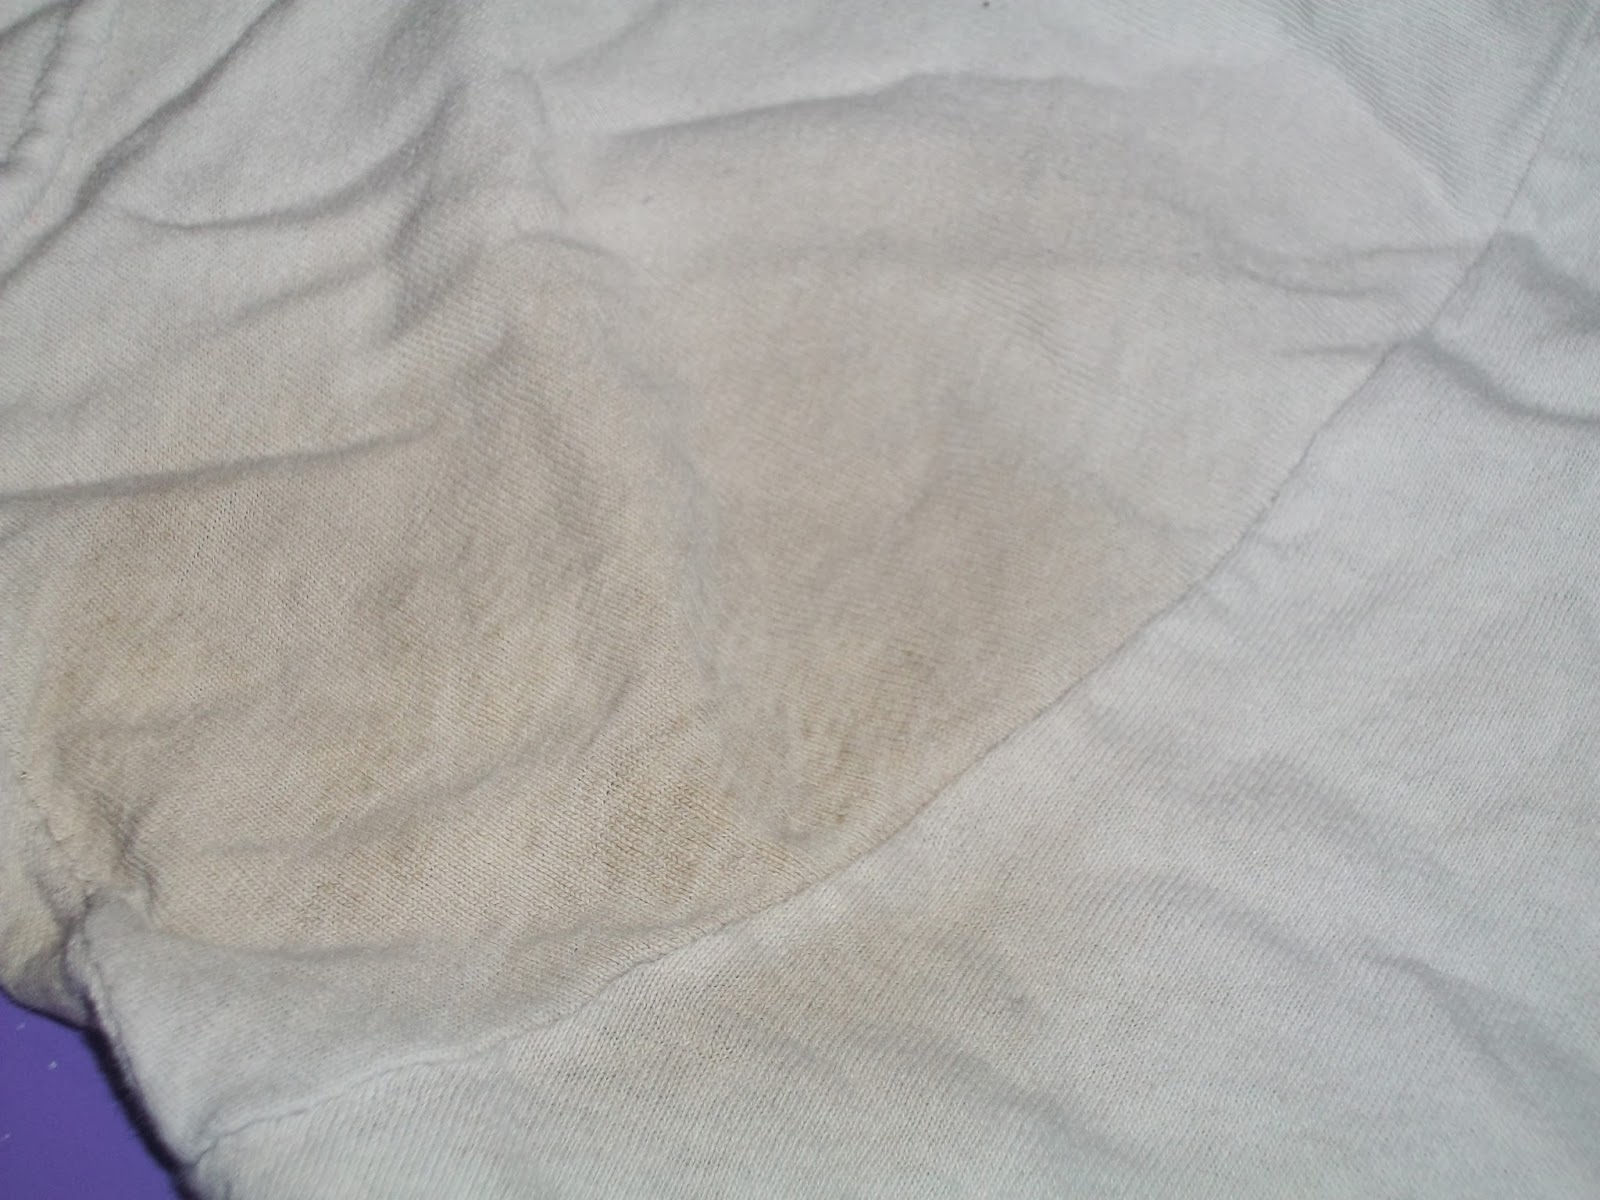 This is what one of the older stain looked like.